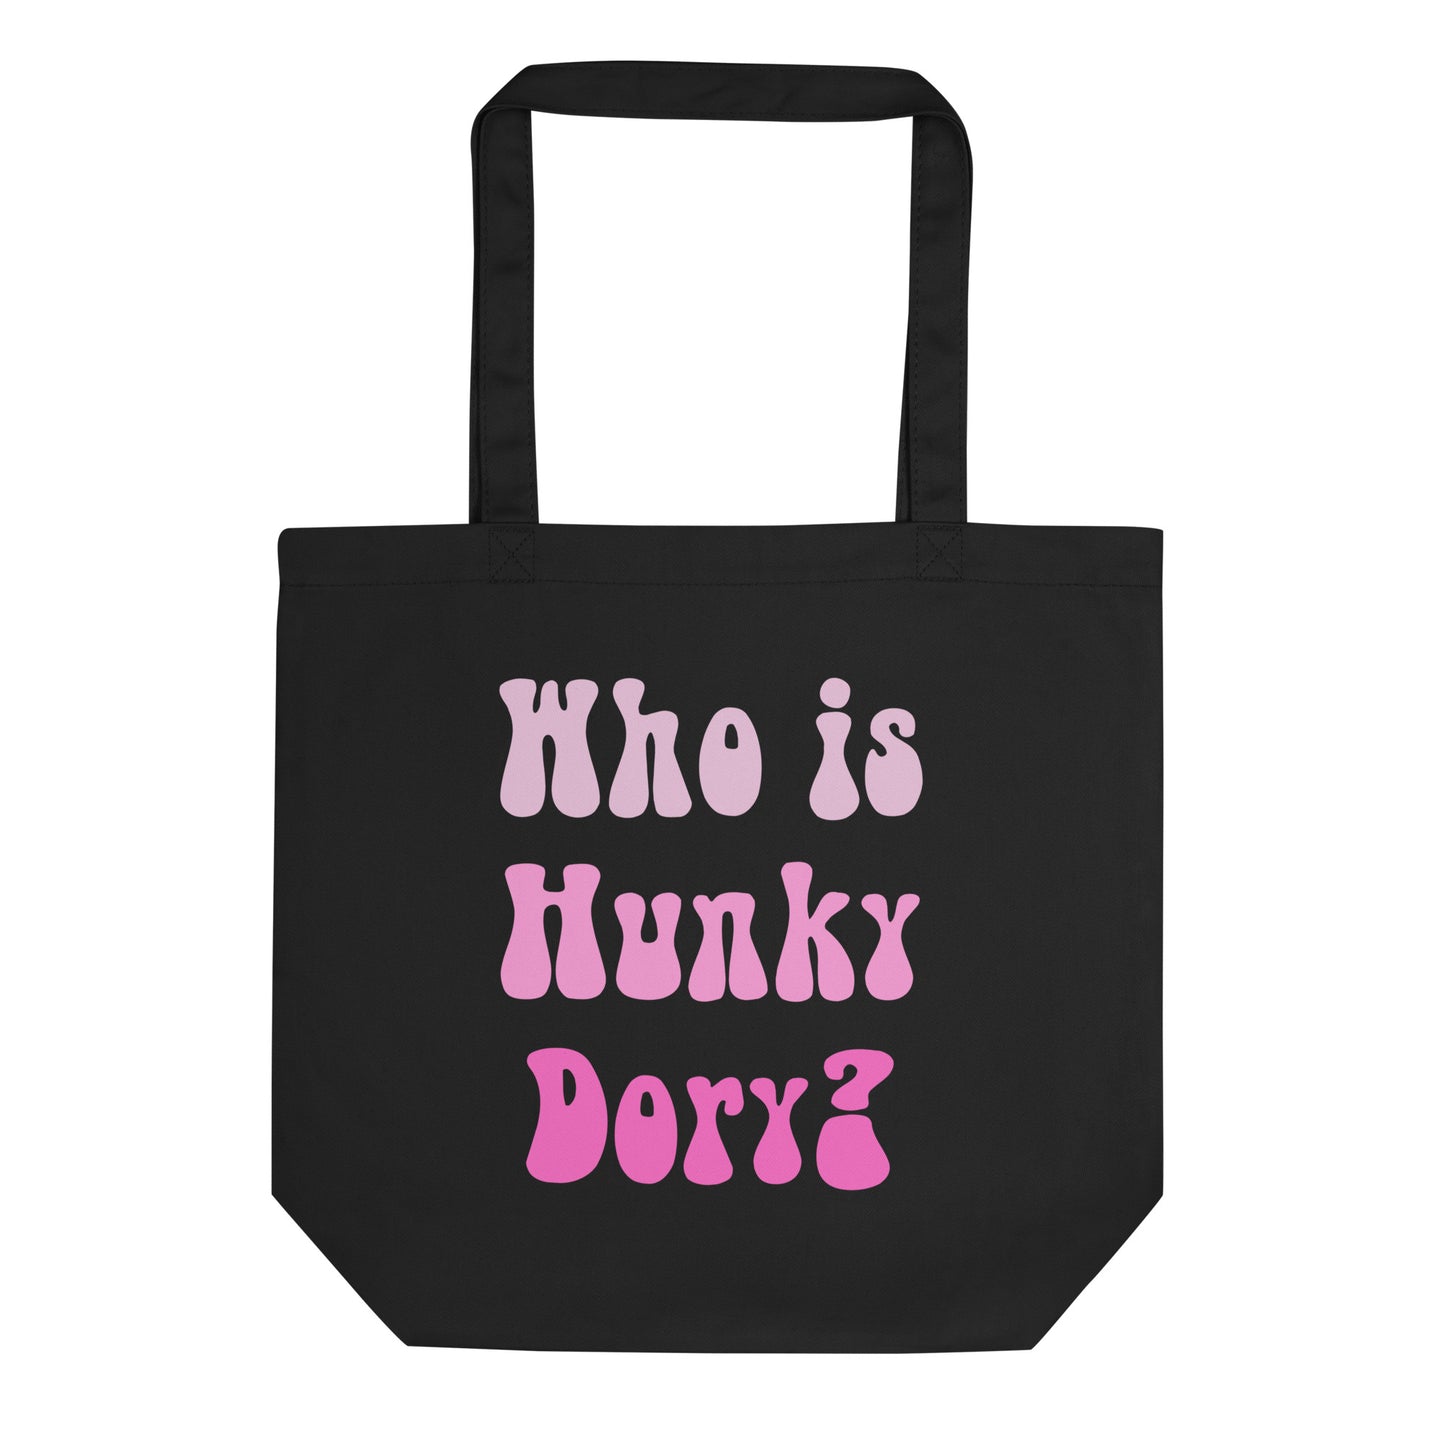 Who is Hunky Dory? Kathy Hilton - Real Housewives of Beverly HIlls